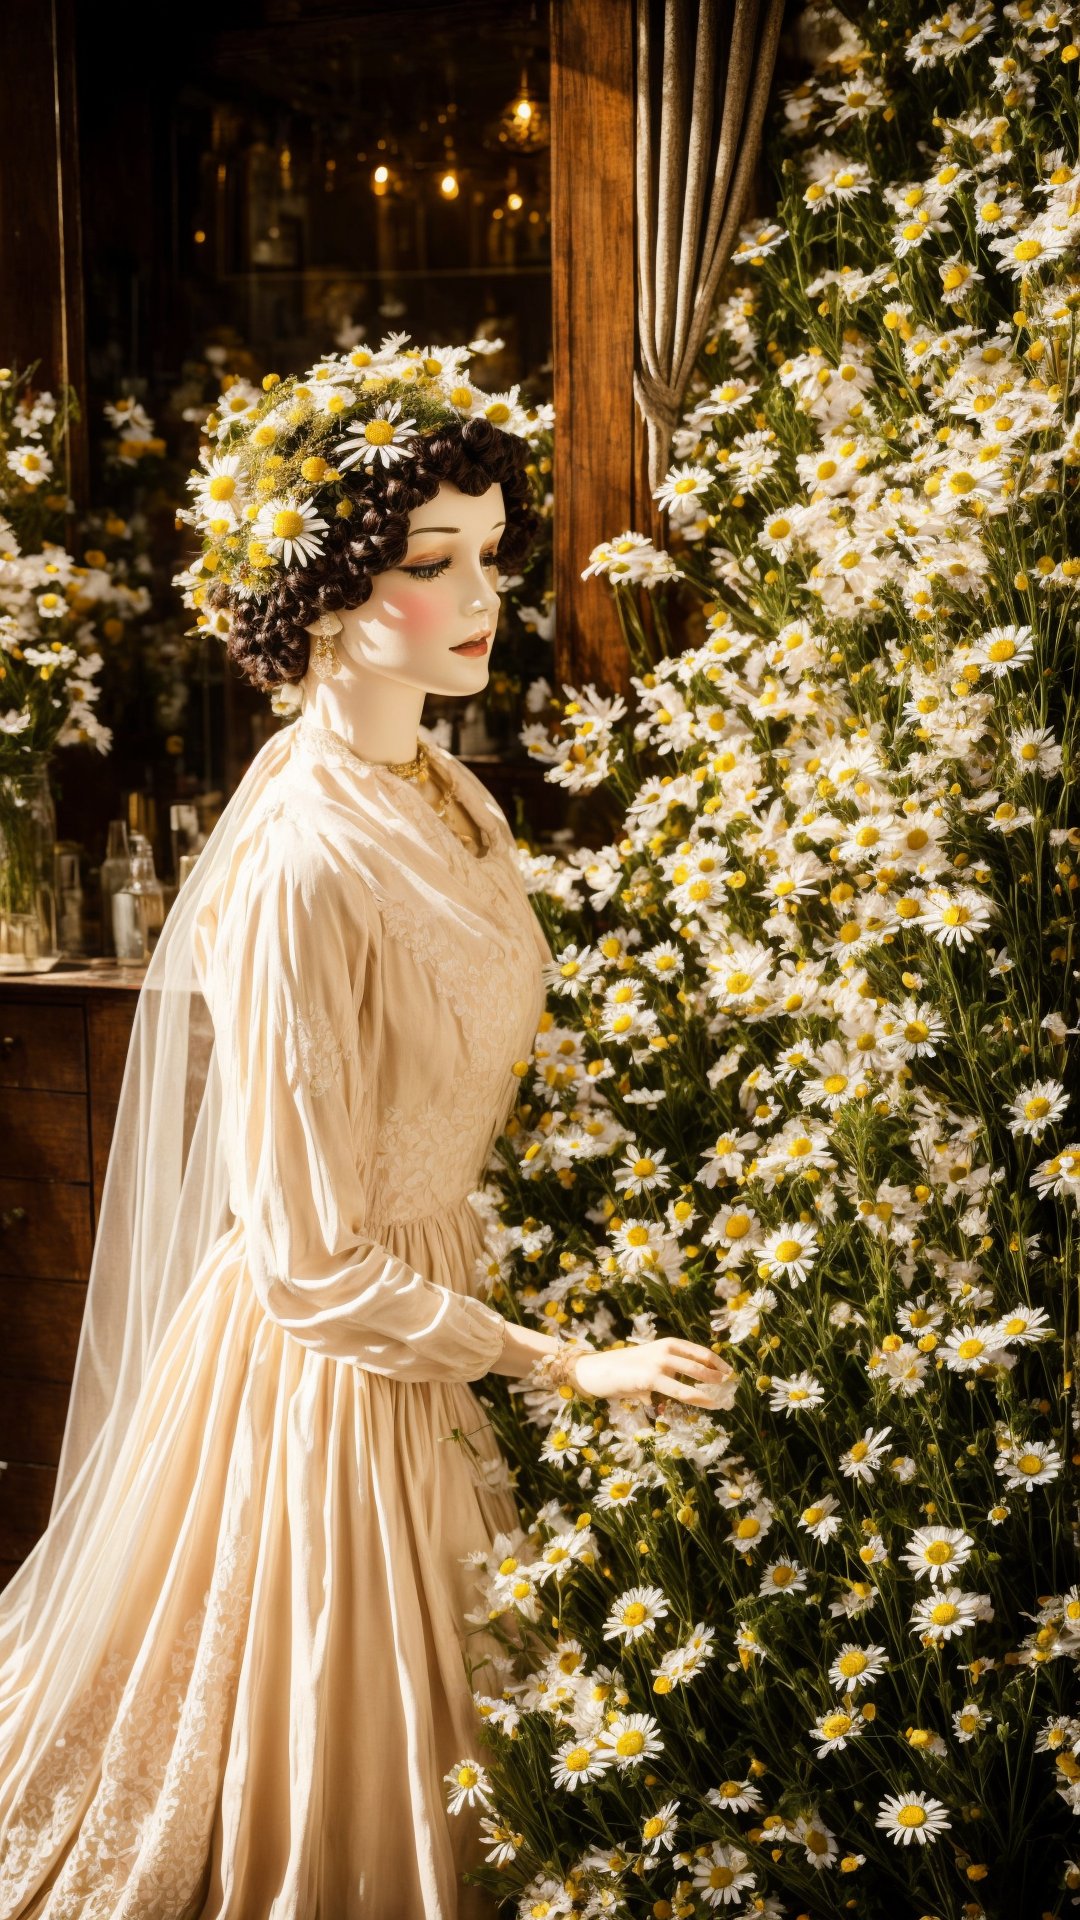 A vintage boutique hums with the gentle whirring of clockwork flowers. Mannequins in antique suits adorned with daisies stand frozen in time, each bloom a testament to timeless beauty. Whimsical, detailed, high resolution.ViNtAgE,photorealistic,Masterpiece